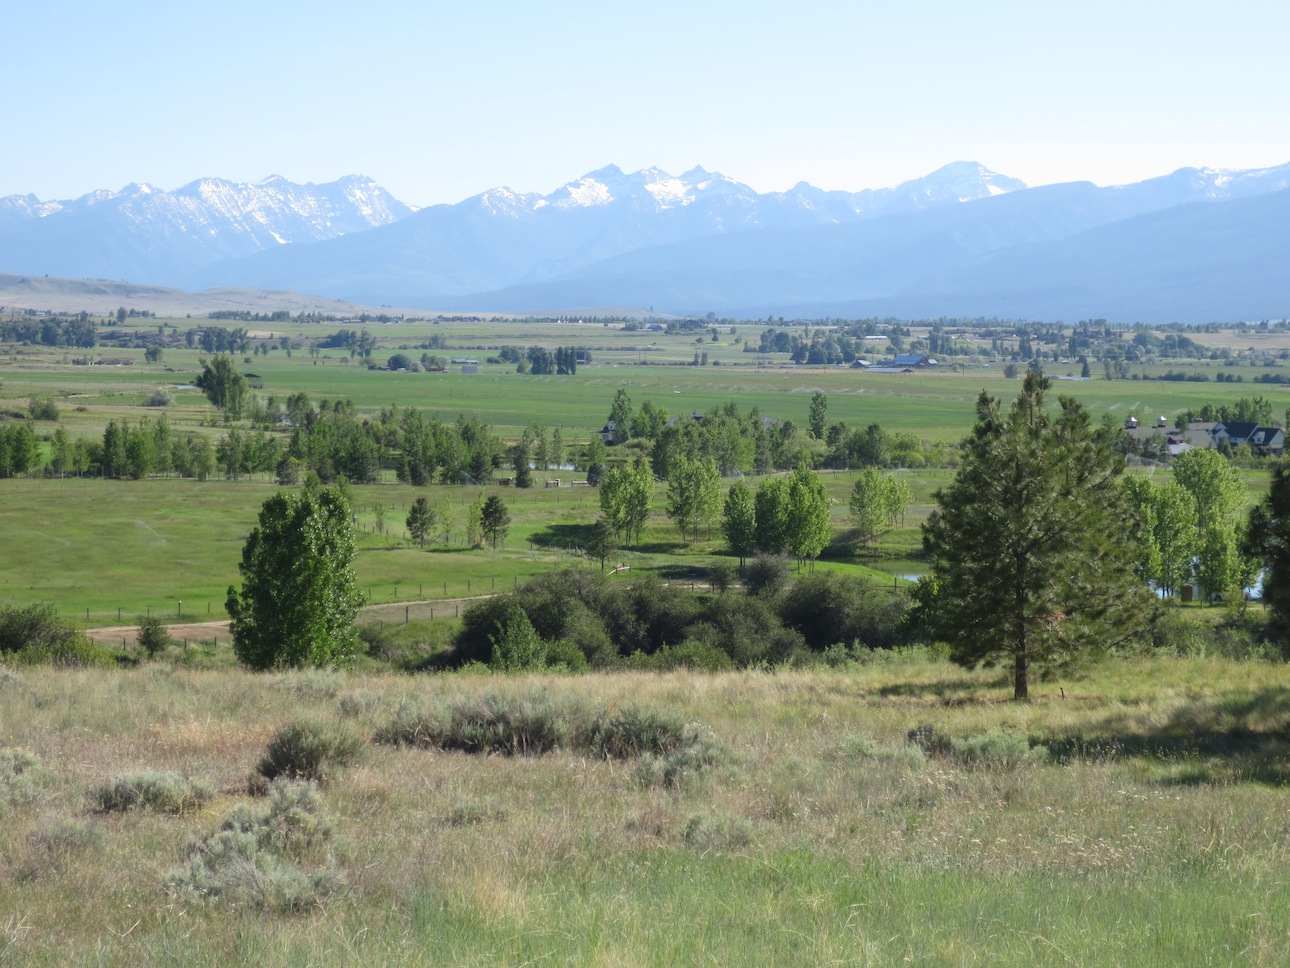 View of the mountains from Hamilton, Montana.